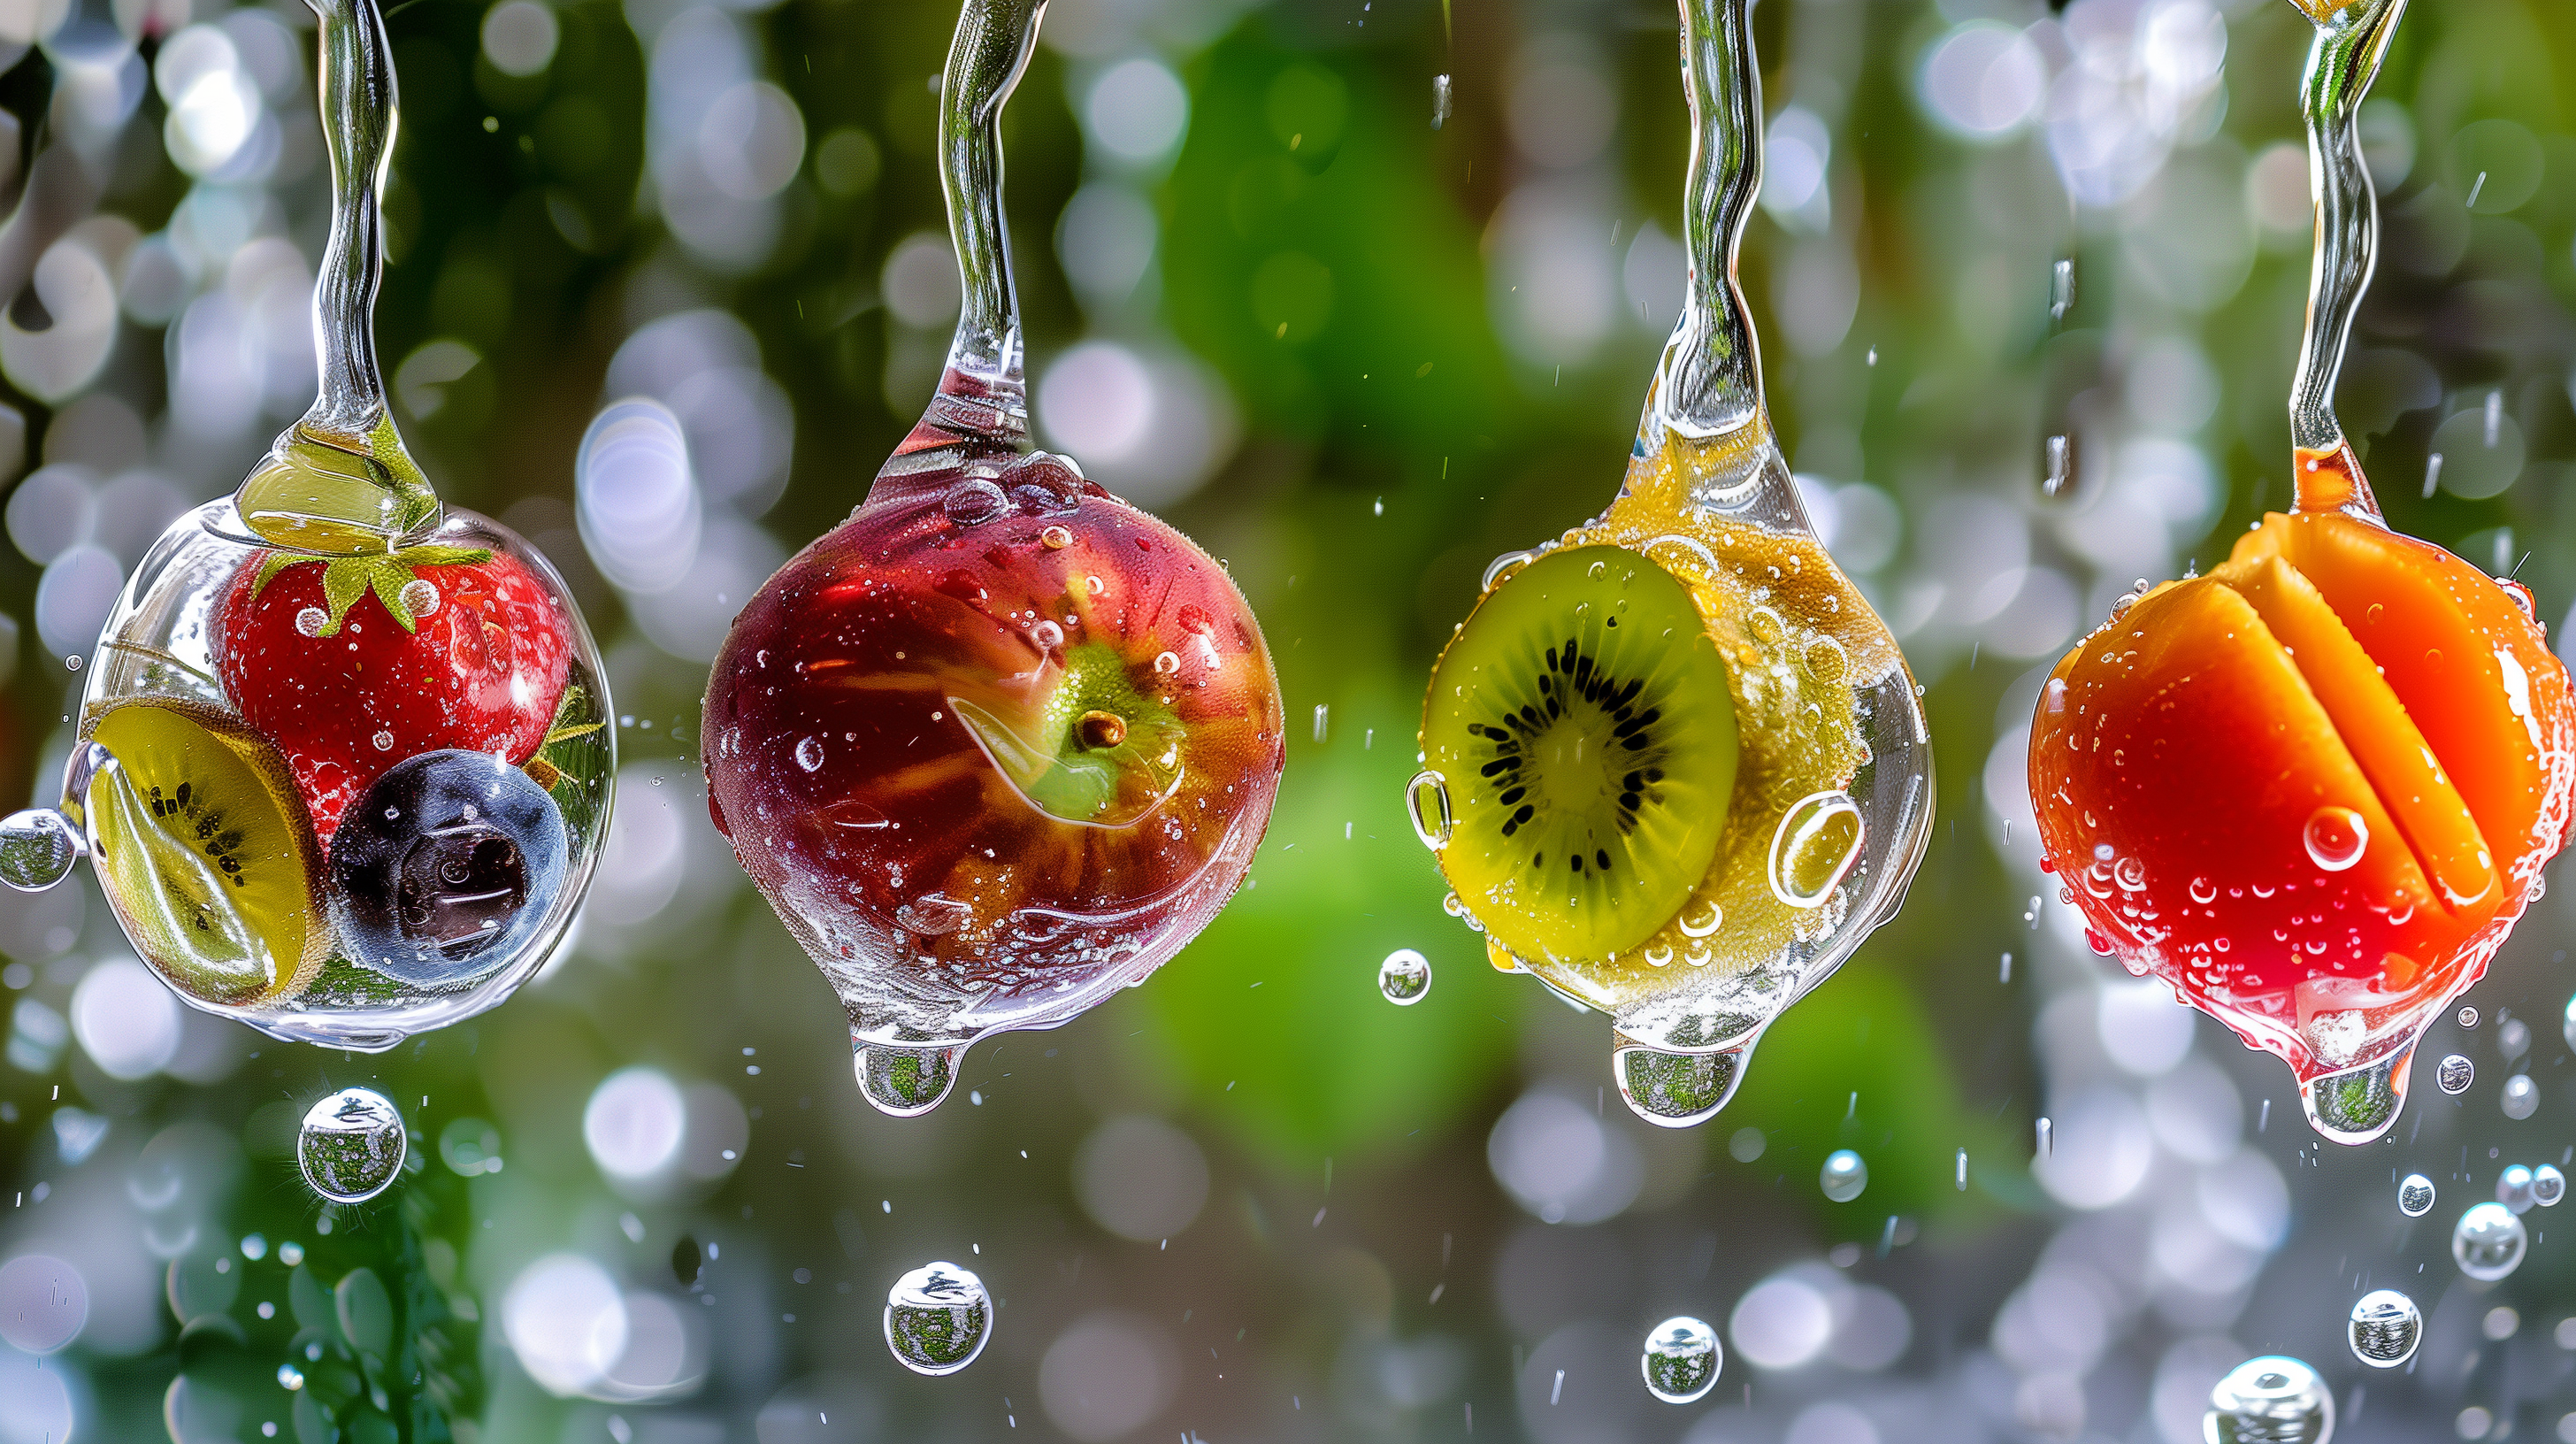 colorful water droplets, each containing a different fruit or vegetable, merging into a crystal-clear stream, symbolizing the natural sources and absorption of water-soluble vitamins